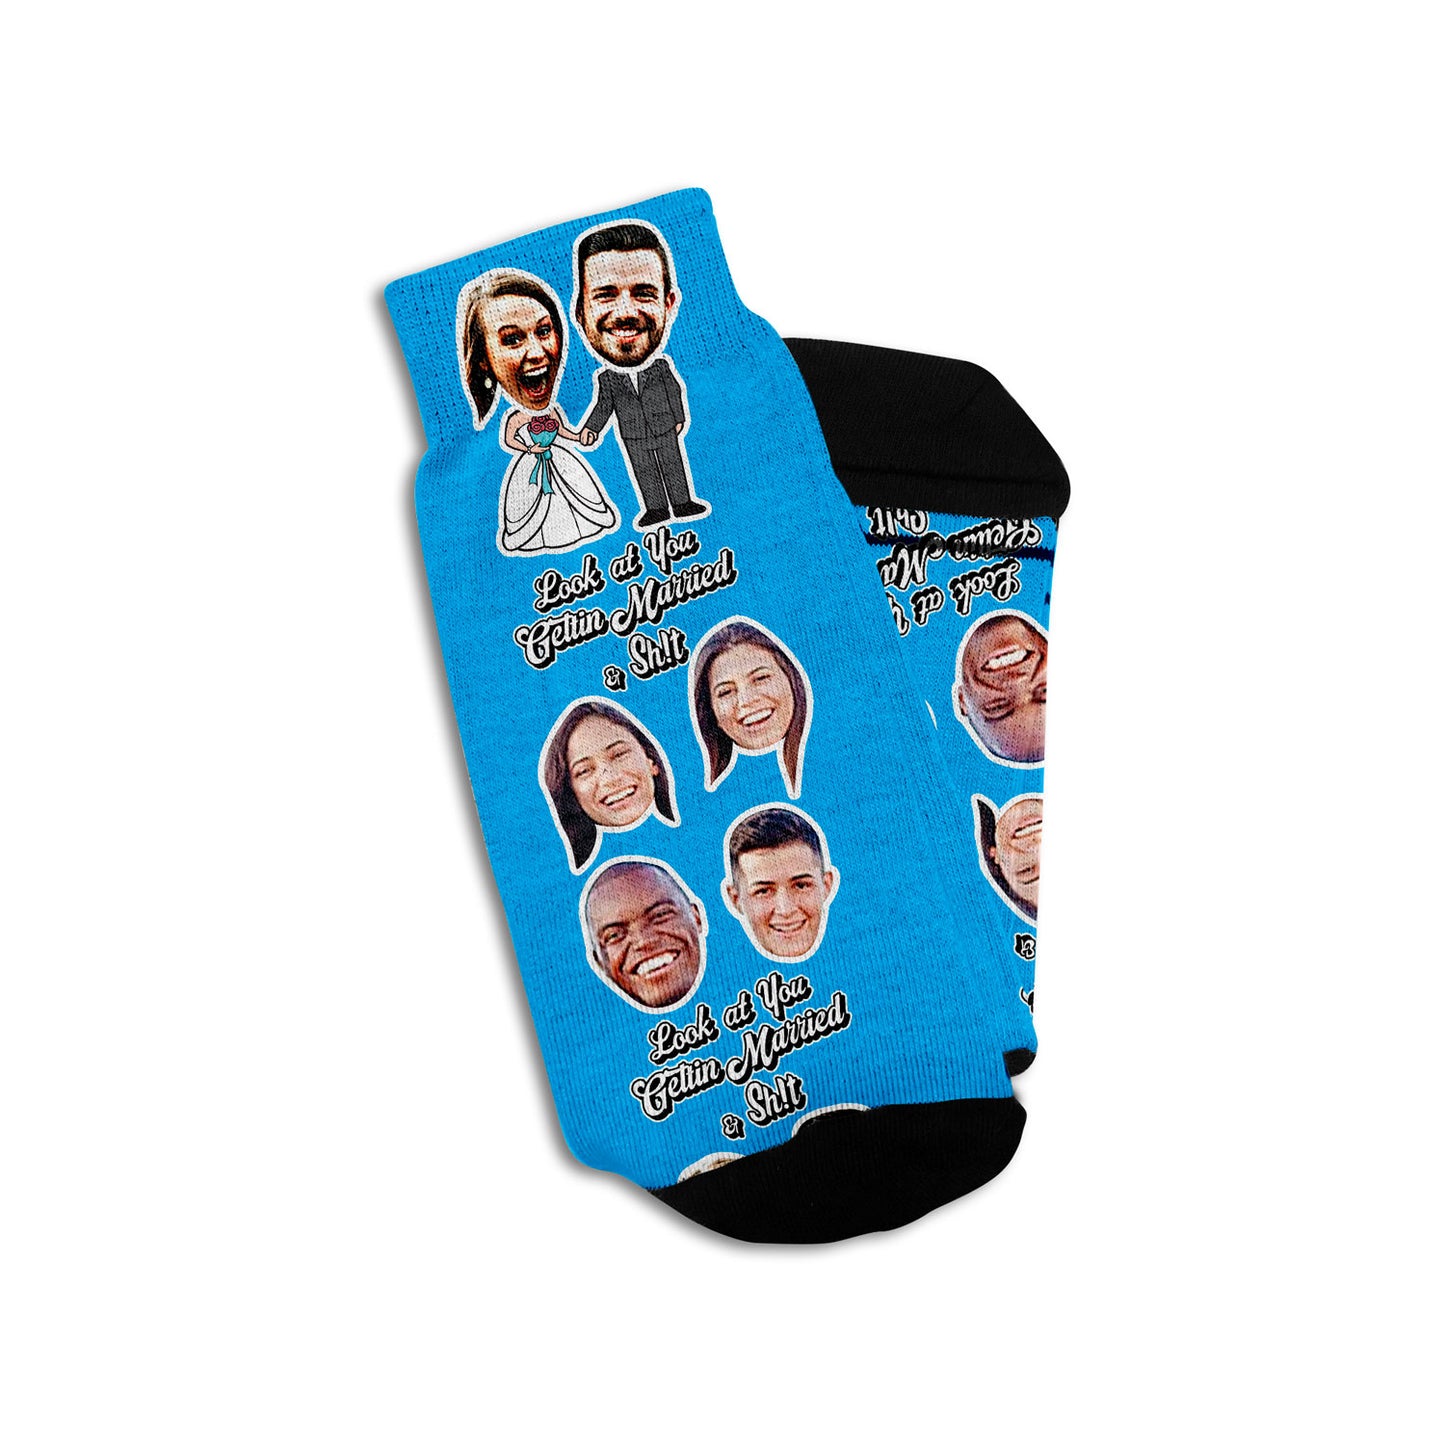 unique wedding gift for couples personalized socks with faces